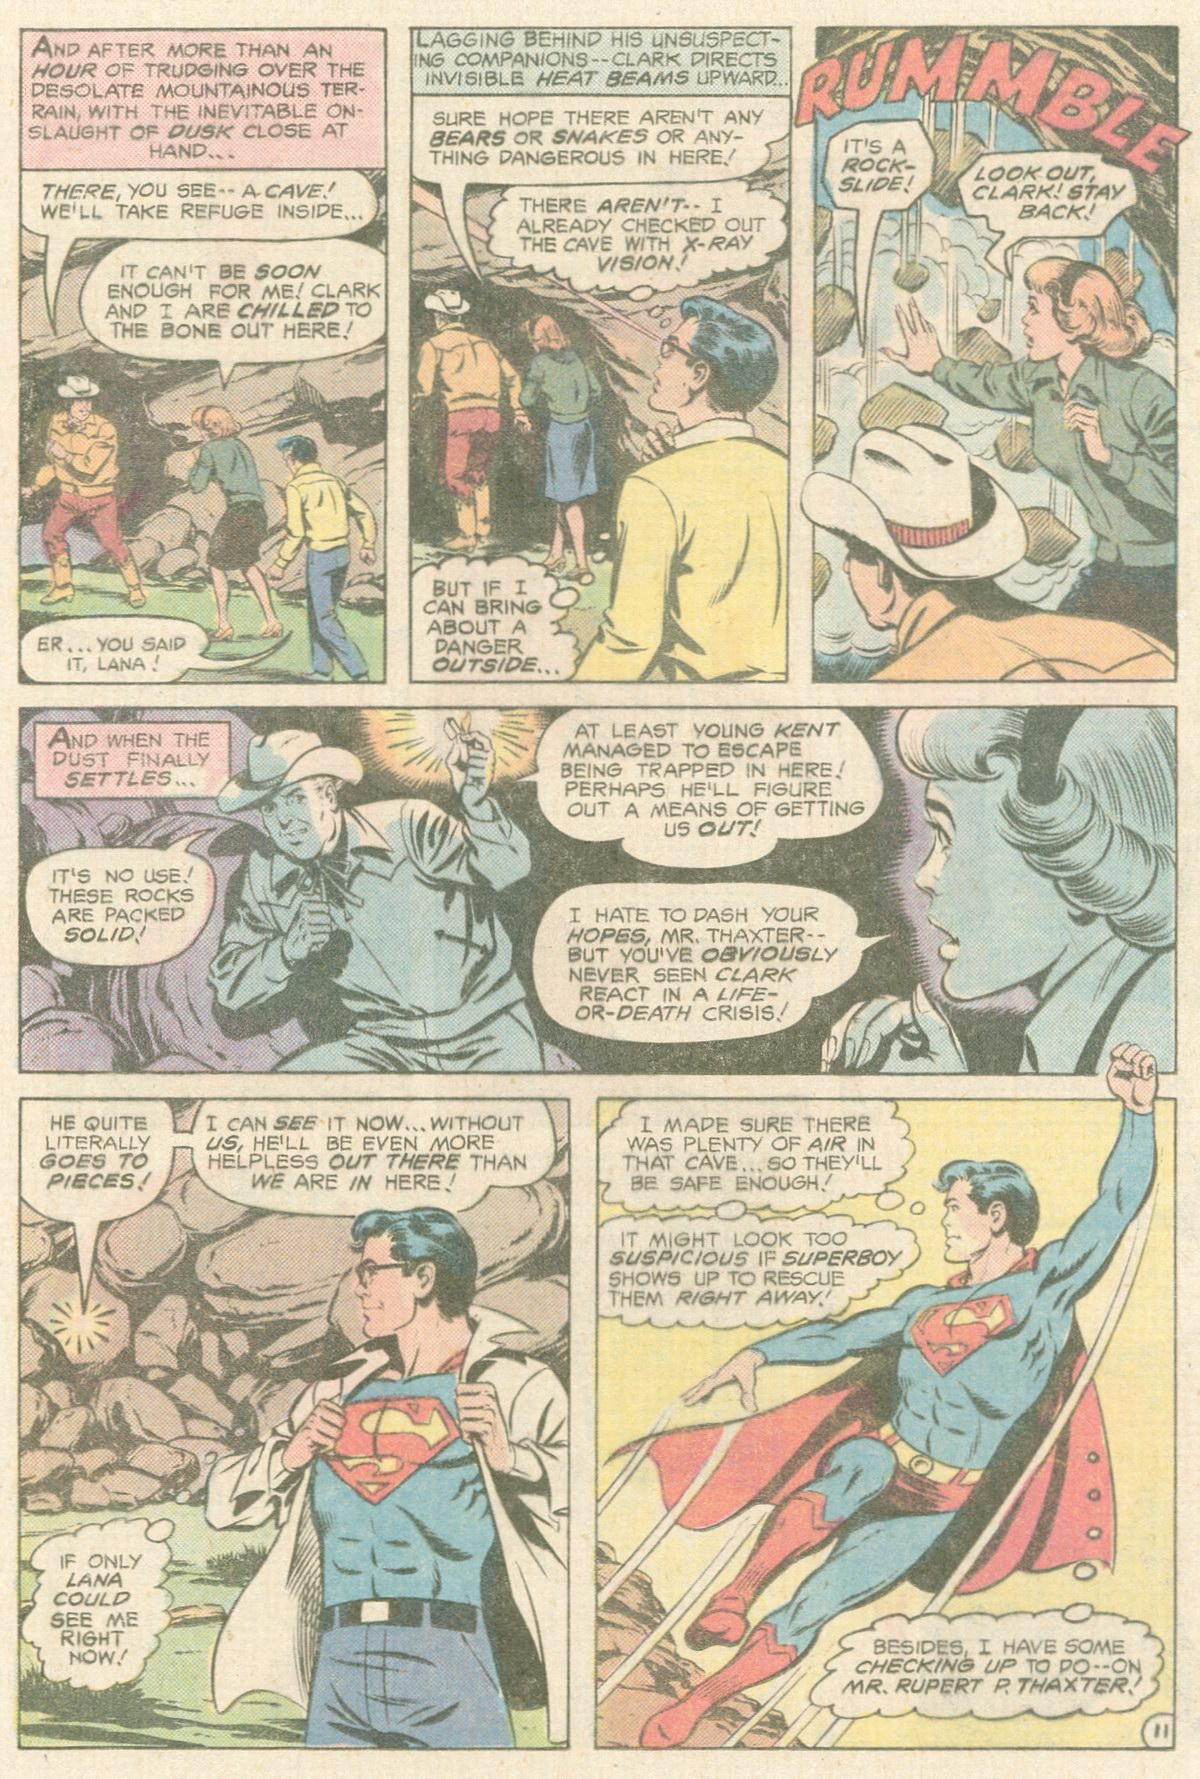 The New Adventures of Superboy 15 Page 11